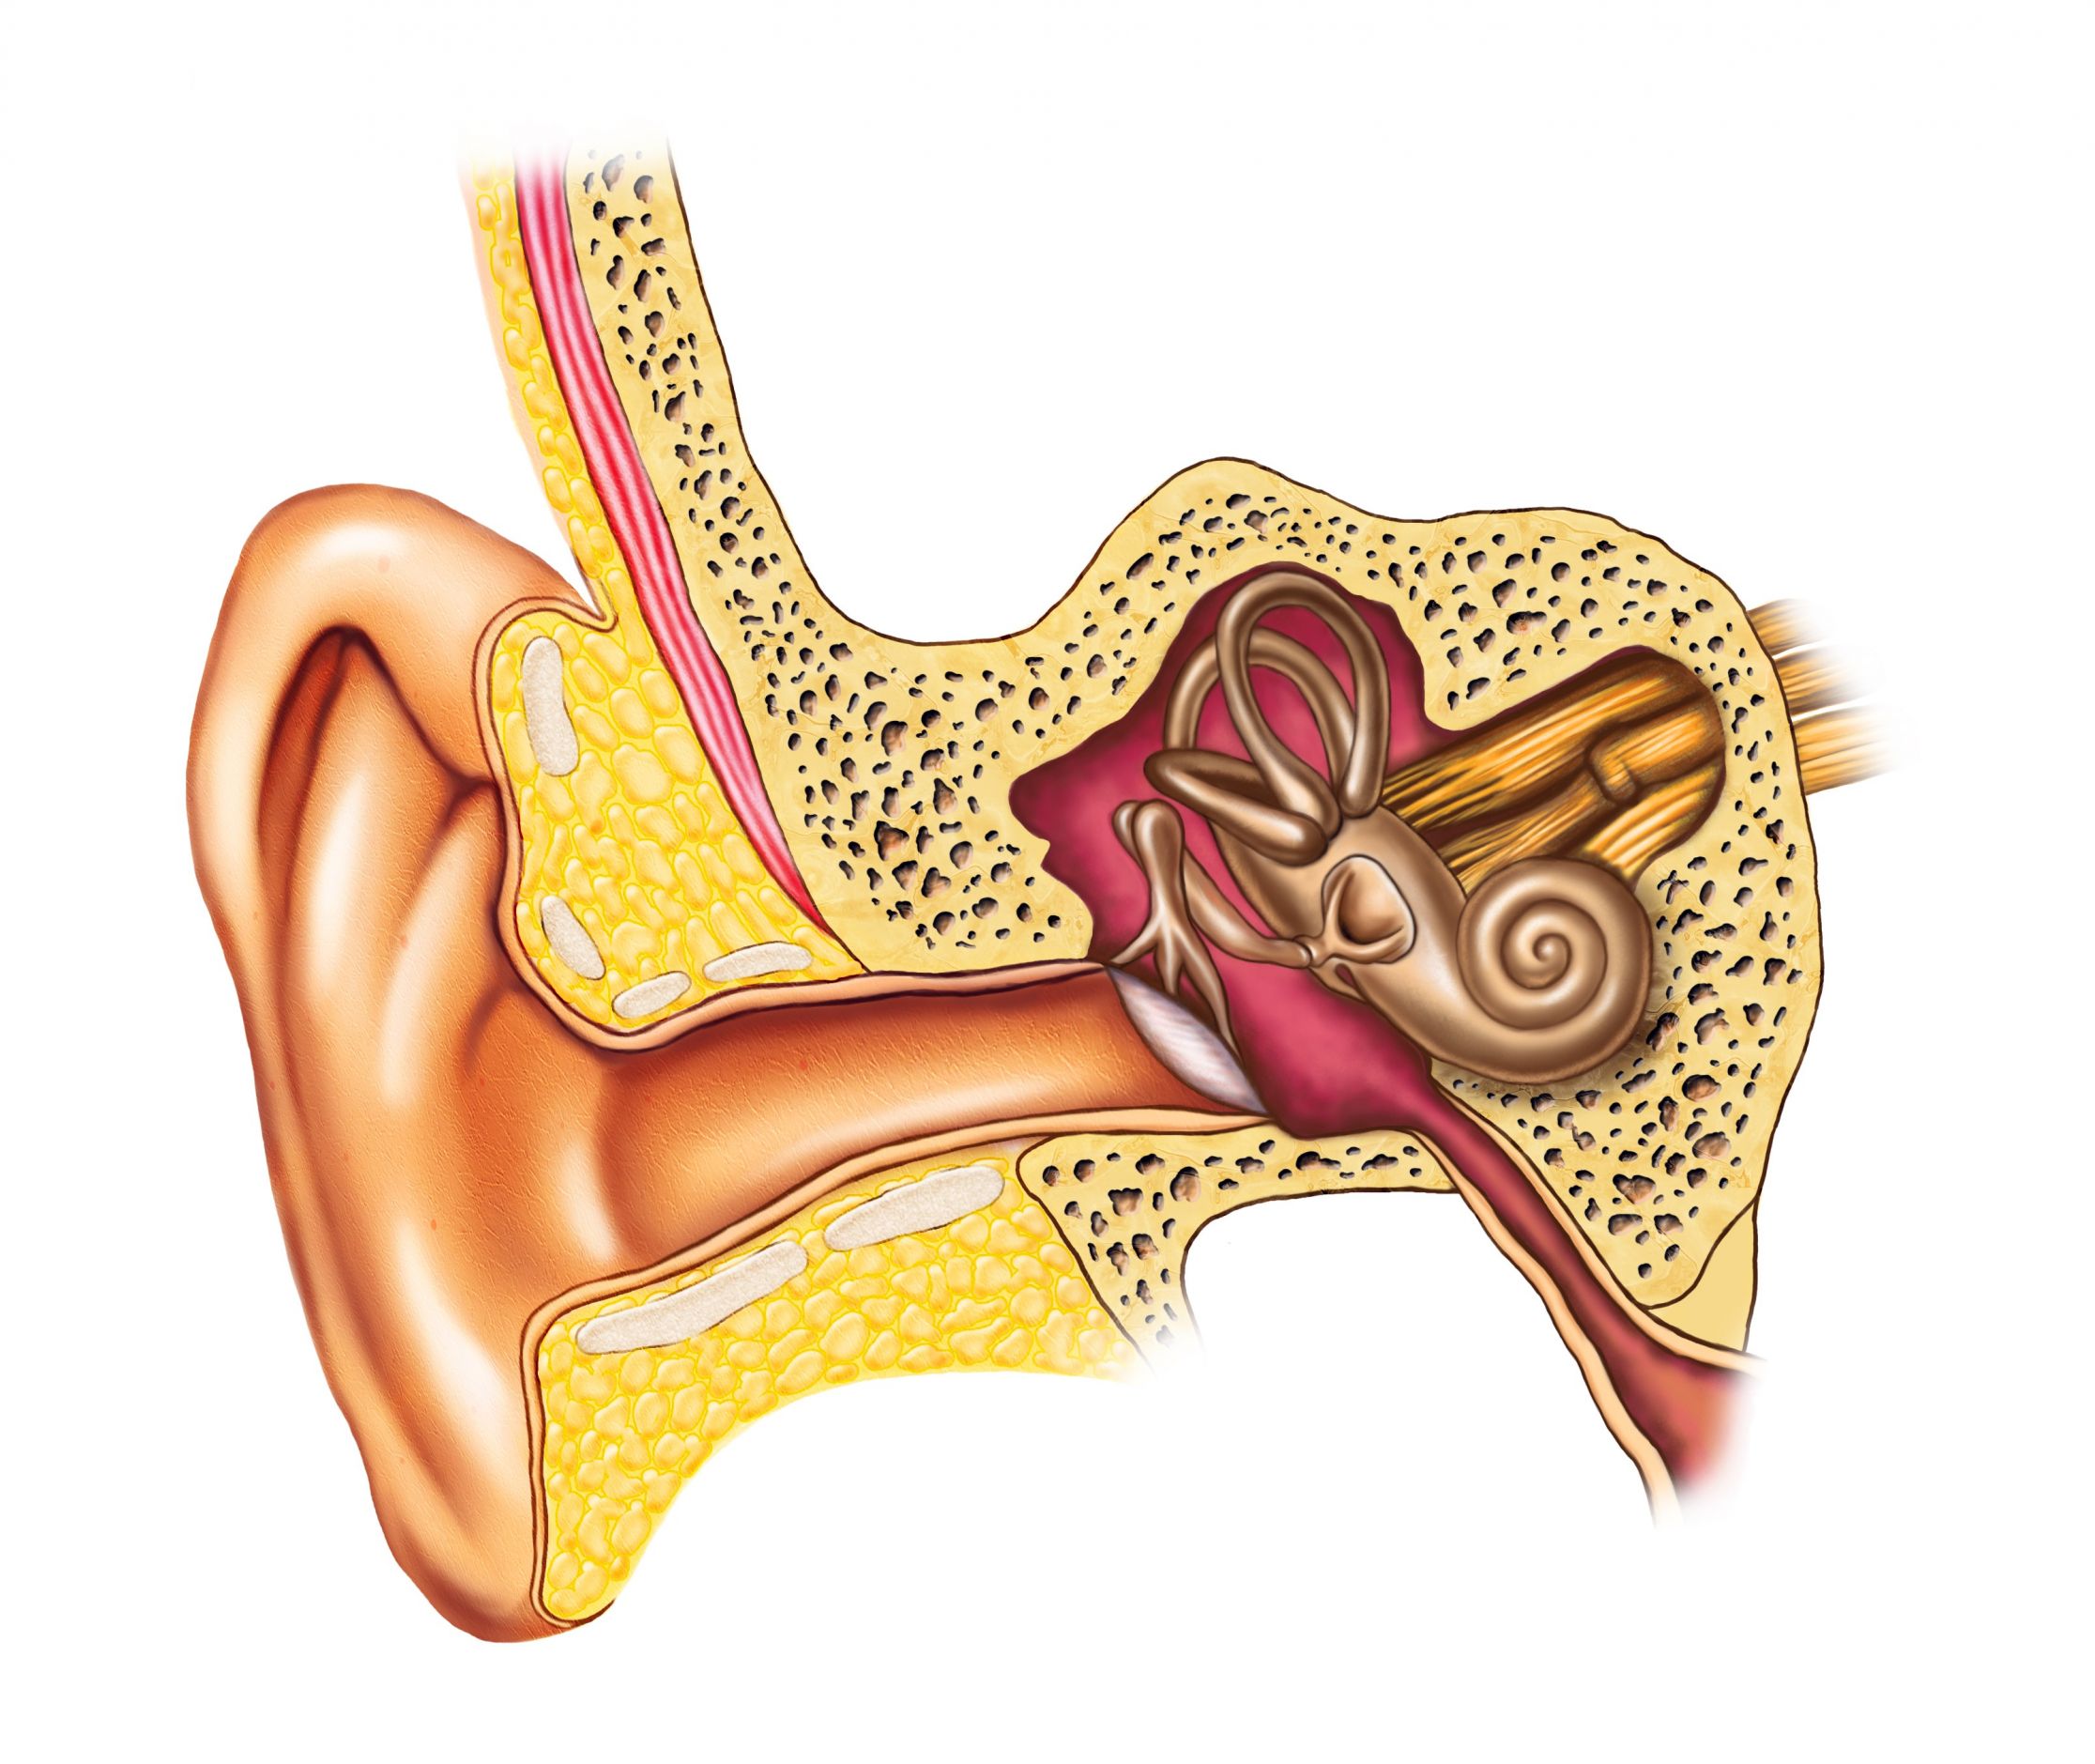 Extramedullary Leukaemic Infiltration of the External Auditory Meatus: A Case Report and Literature Review